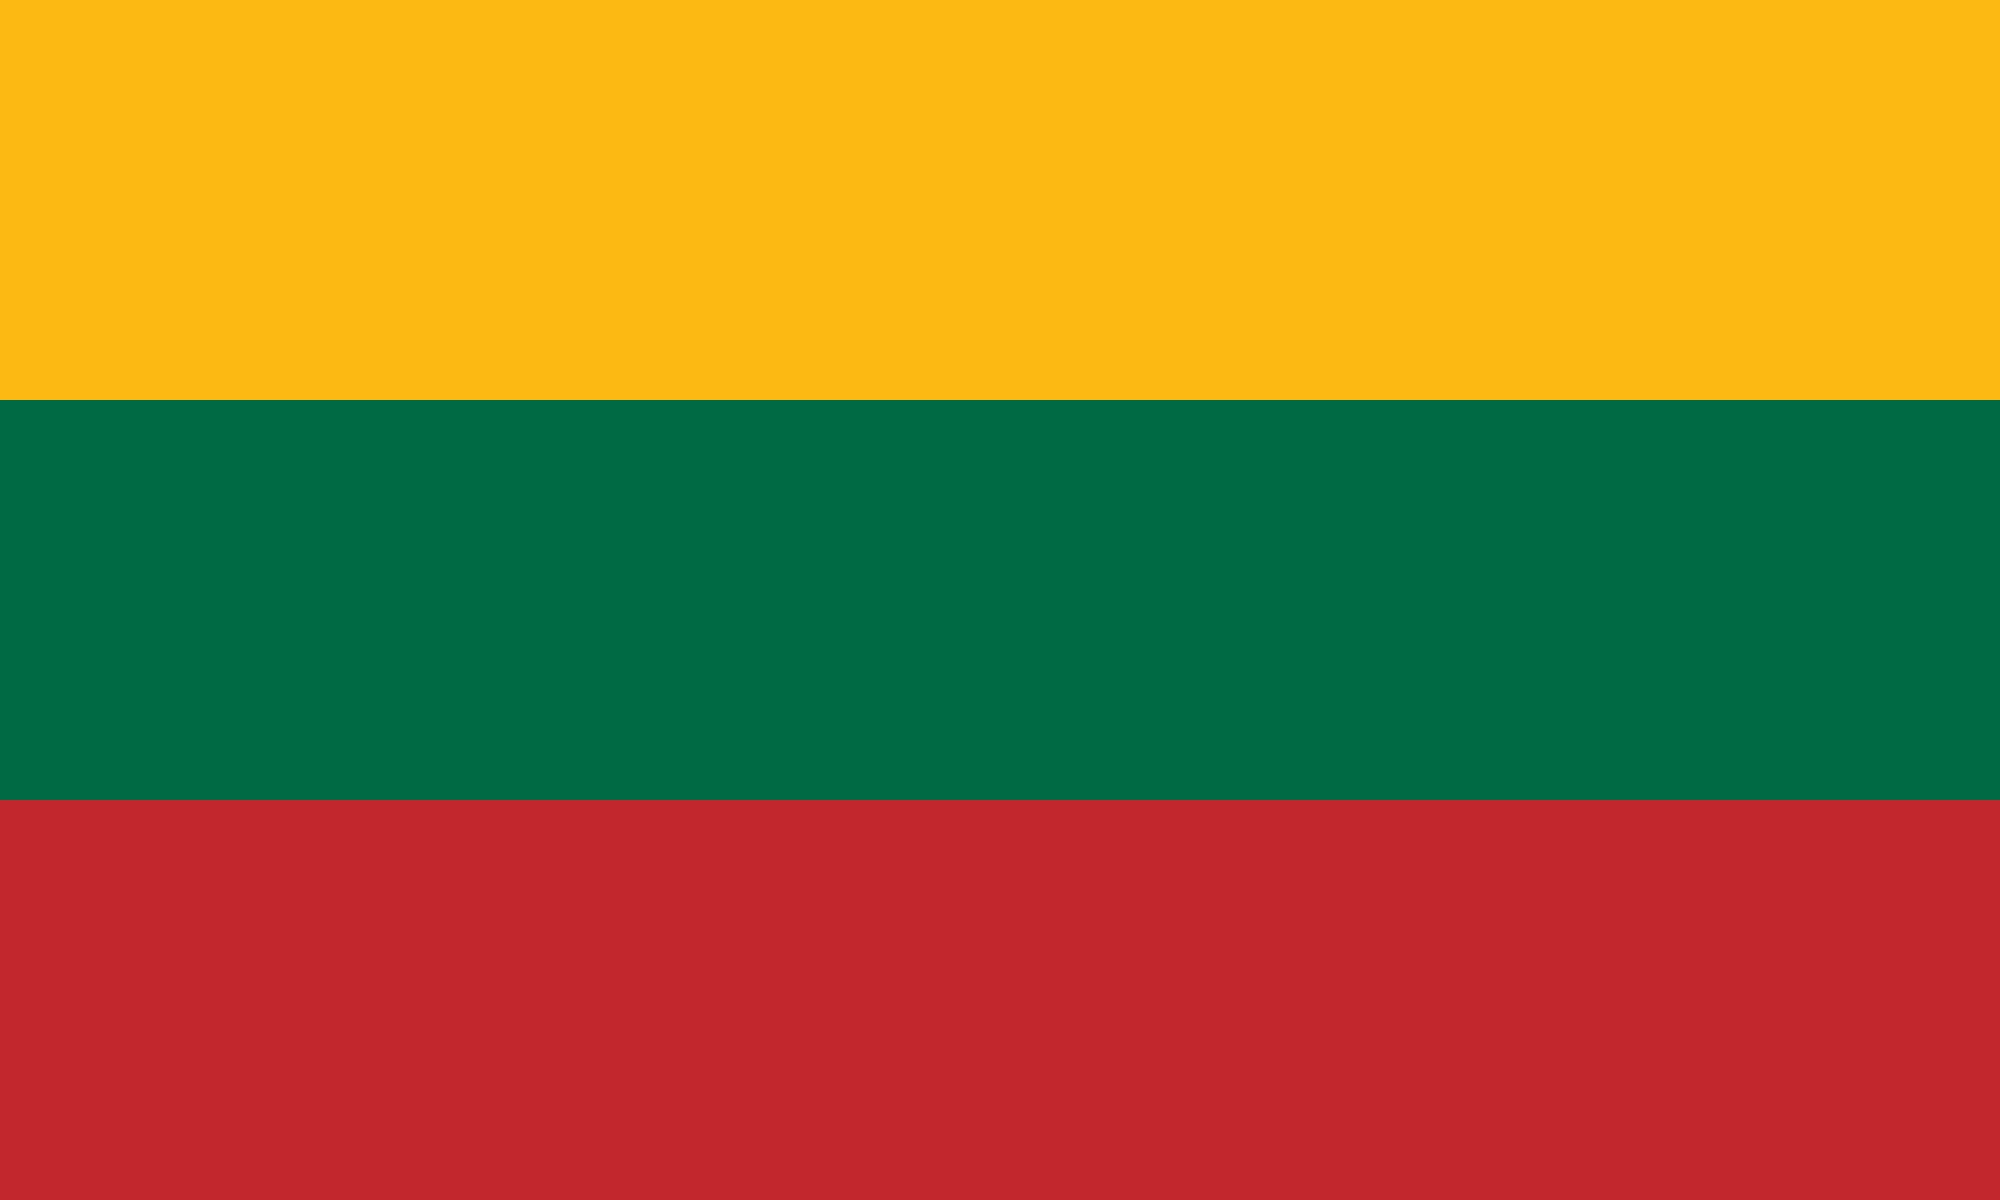 Social rights in Lithuania